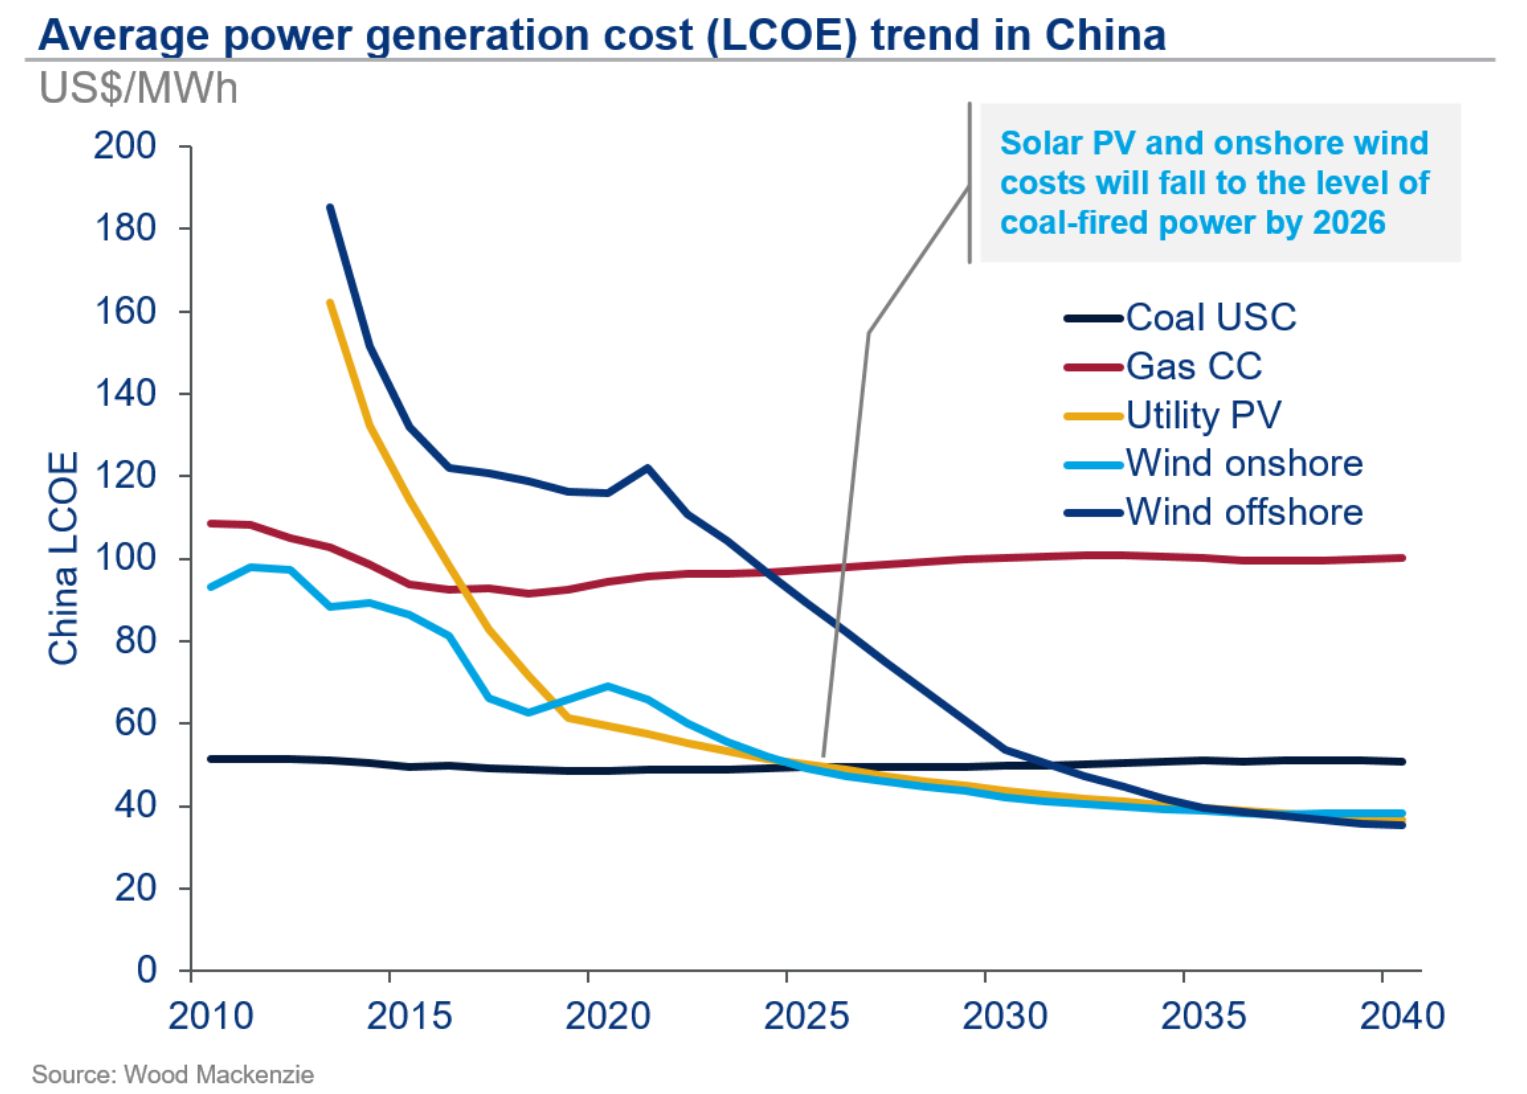 Average power generation cost in China showing solar PV and wind falling below coal in 2026